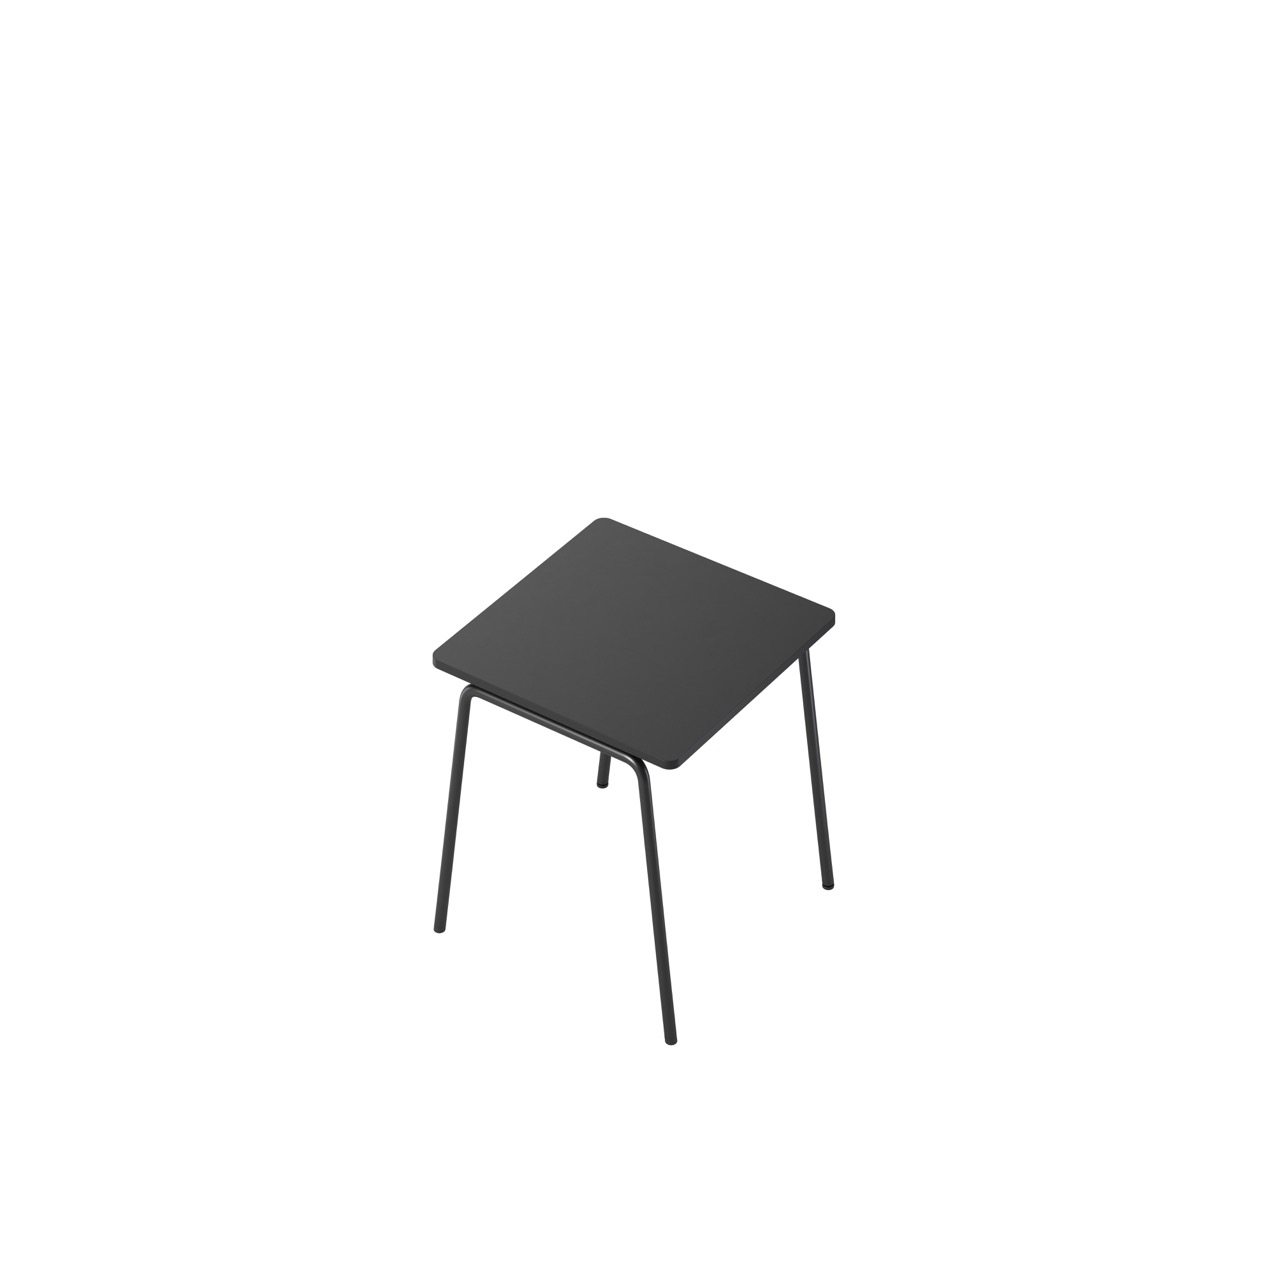 OCEE&FOUR - Tables - FourReal 74 - 80 x 80 - Angled - Packshot Image 4 Large